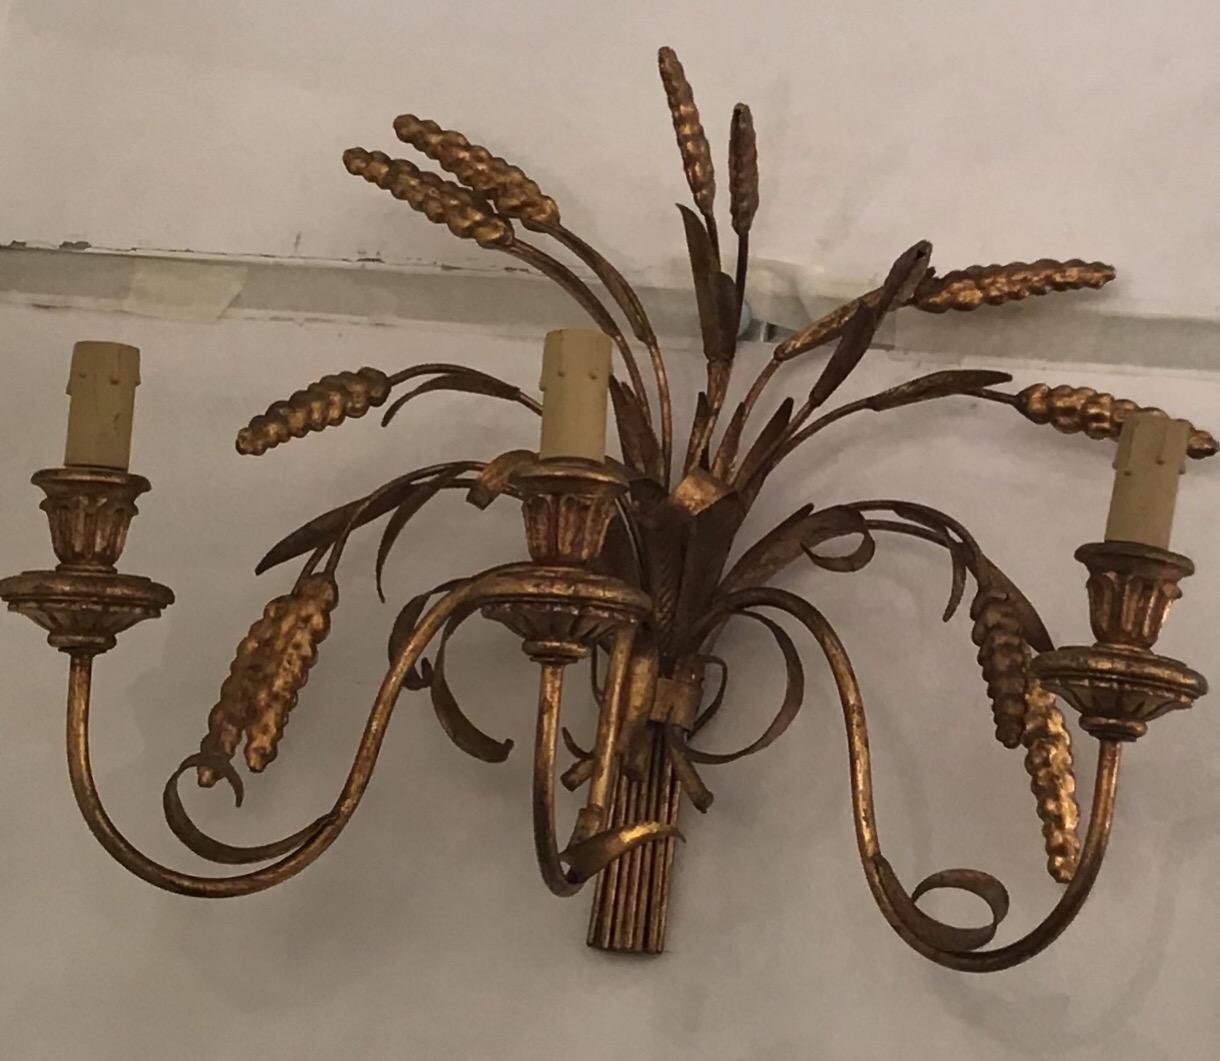 Other Coco Chanel “Fasce Di Grano” N 4 Sconces Golden Natural Iron For Sale